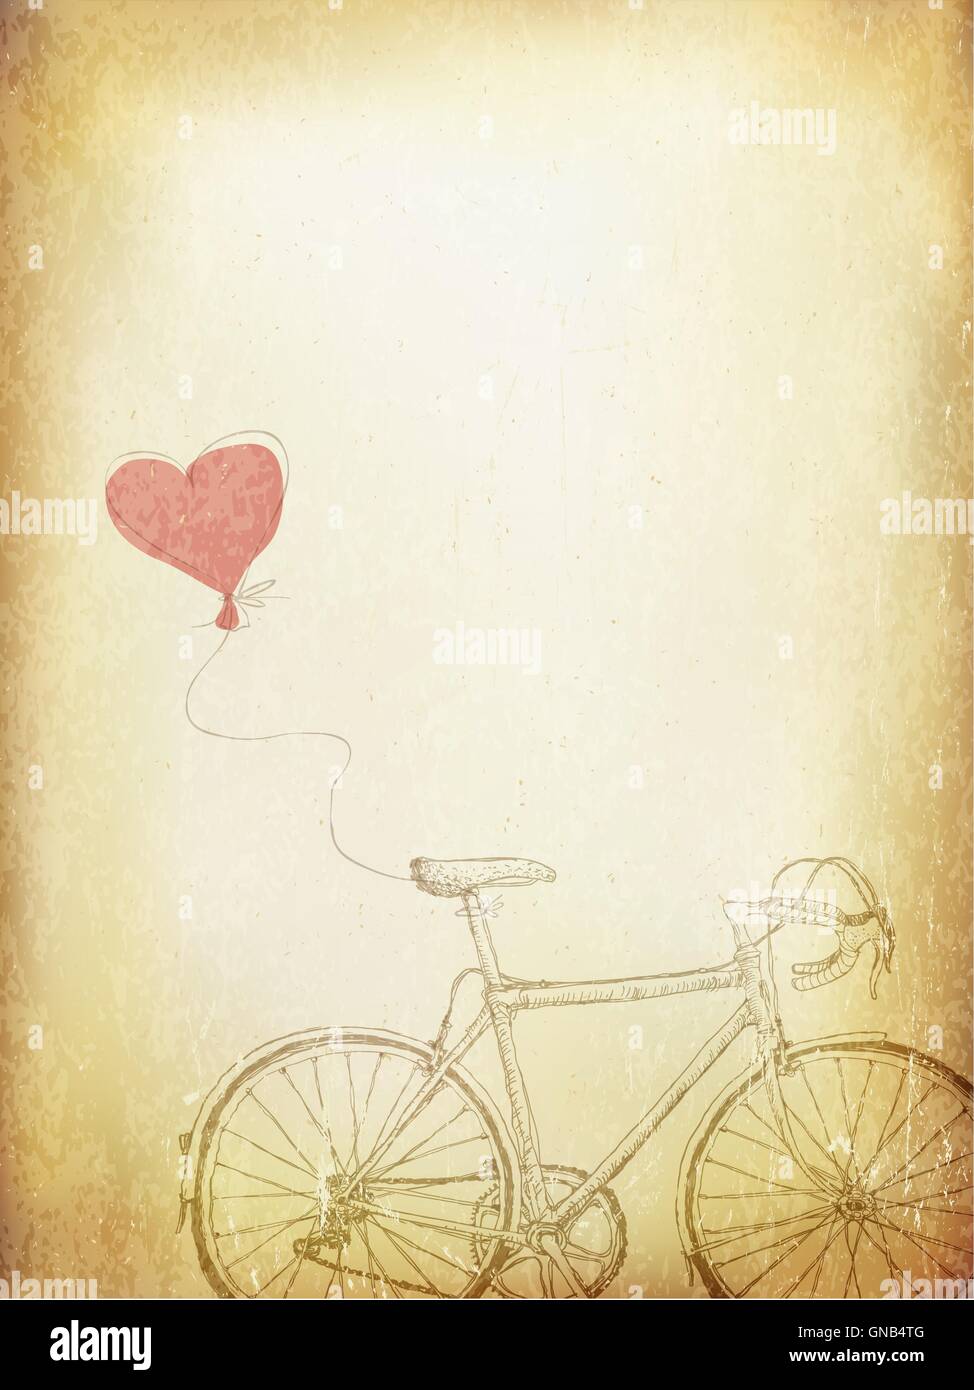 Vintage Valentines Illustration with Bicycle and Heart Baloon. A Stock Vector